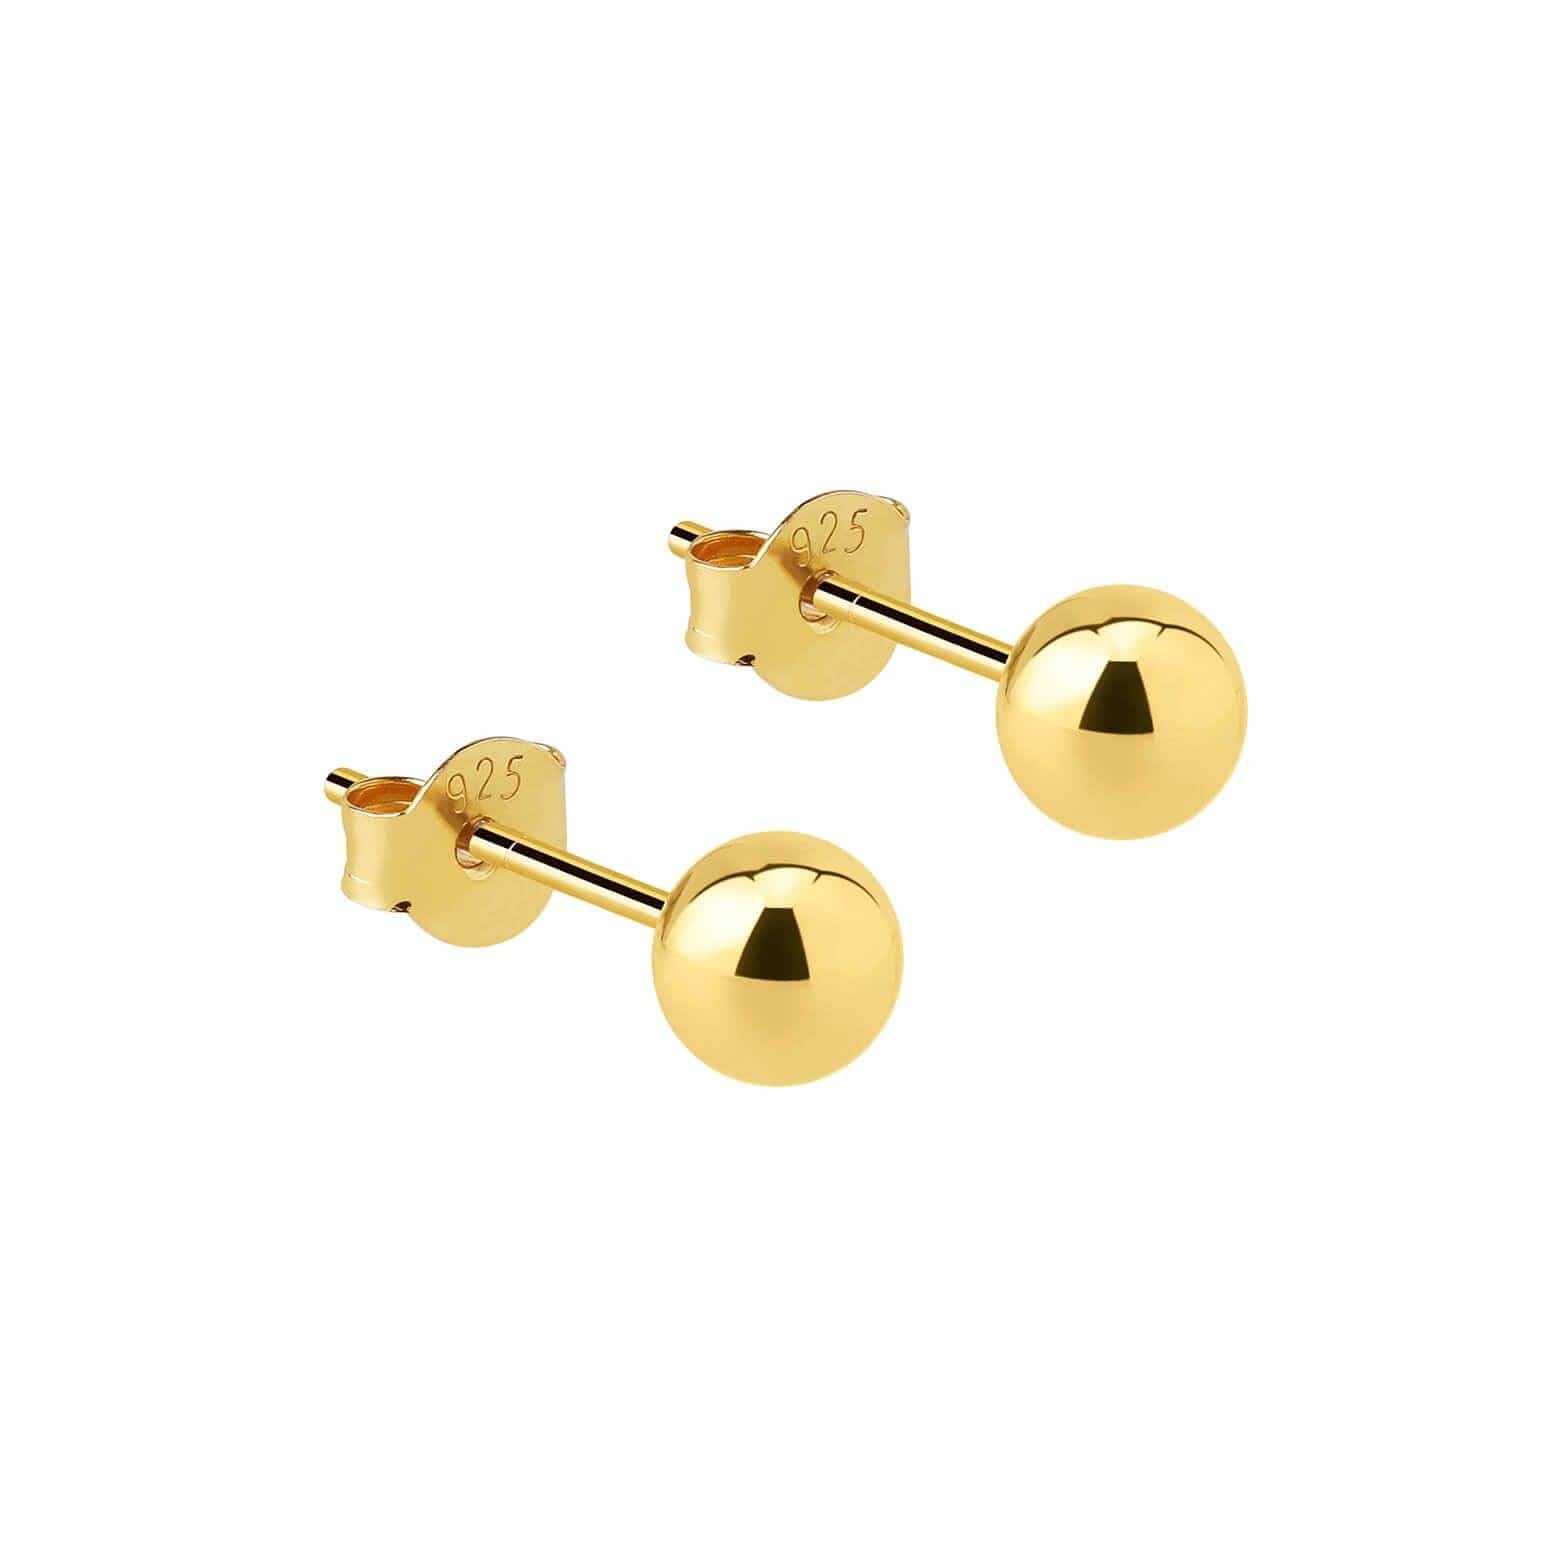 7mm classic stud earring gold plated